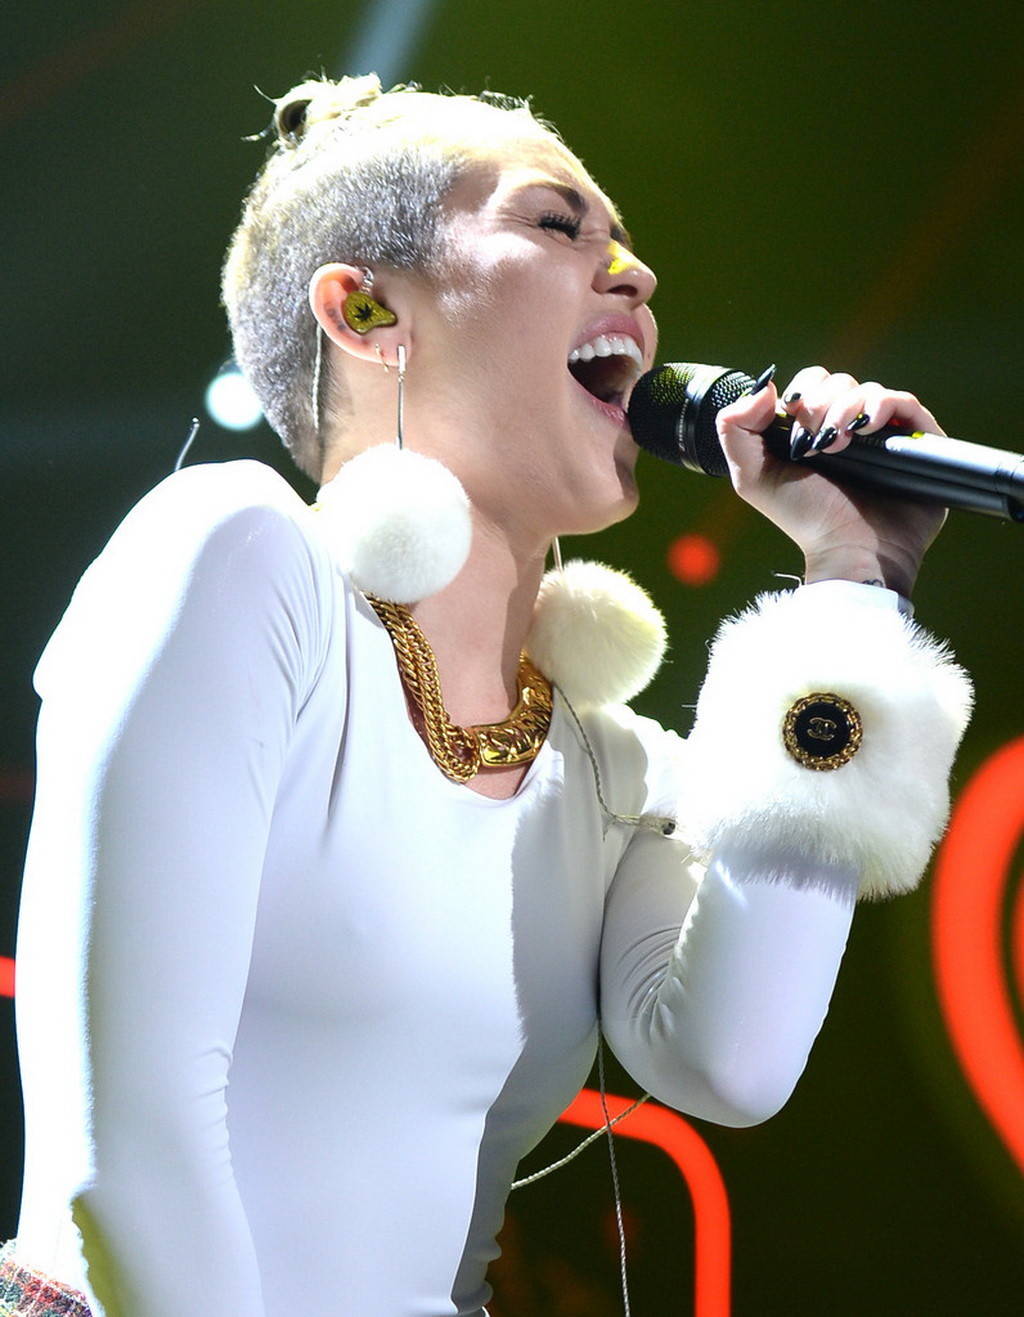 Miley Cyrus Wearing White Transparent Bodysuit At Y100 Jingle Ball 2013 In Miami